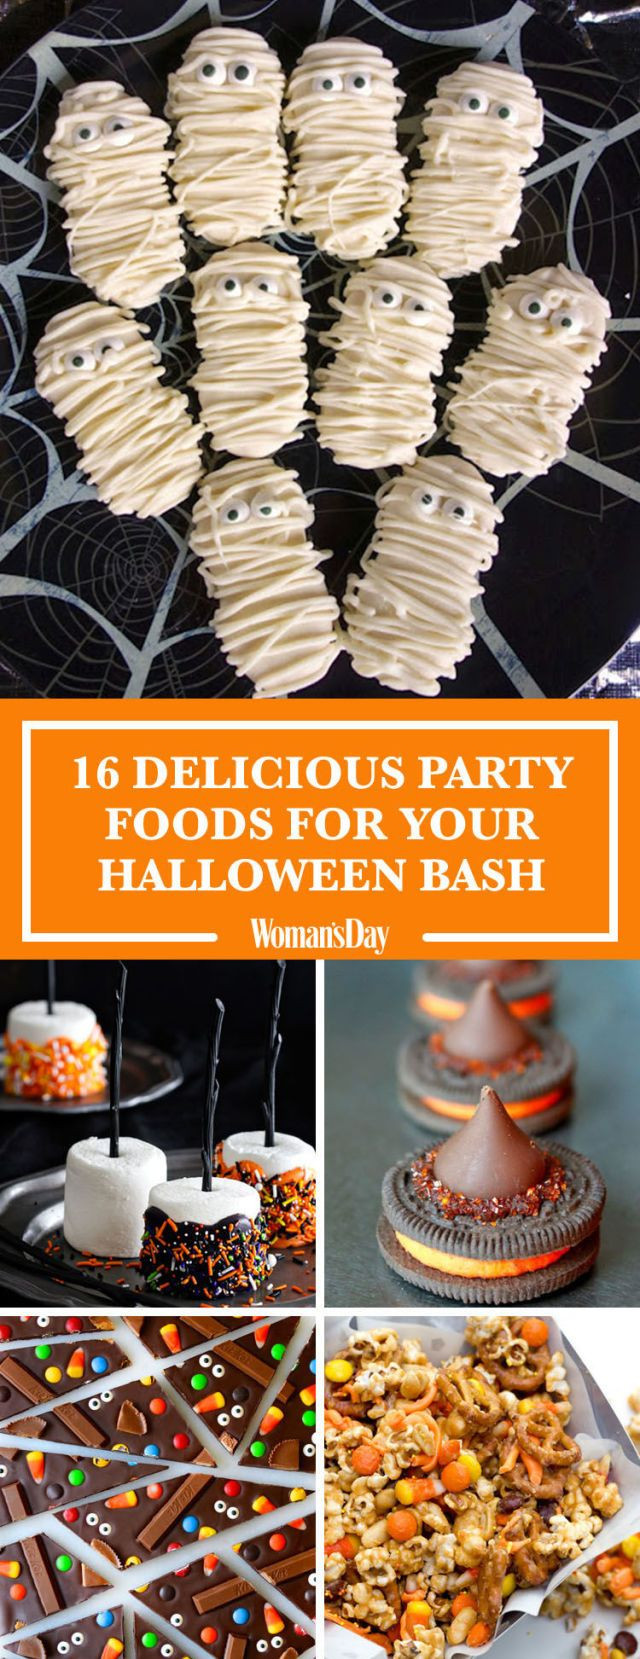 Easy Halloween Party Ideas
 22 Easy Halloween Party Food Ideas Cute Recipes for